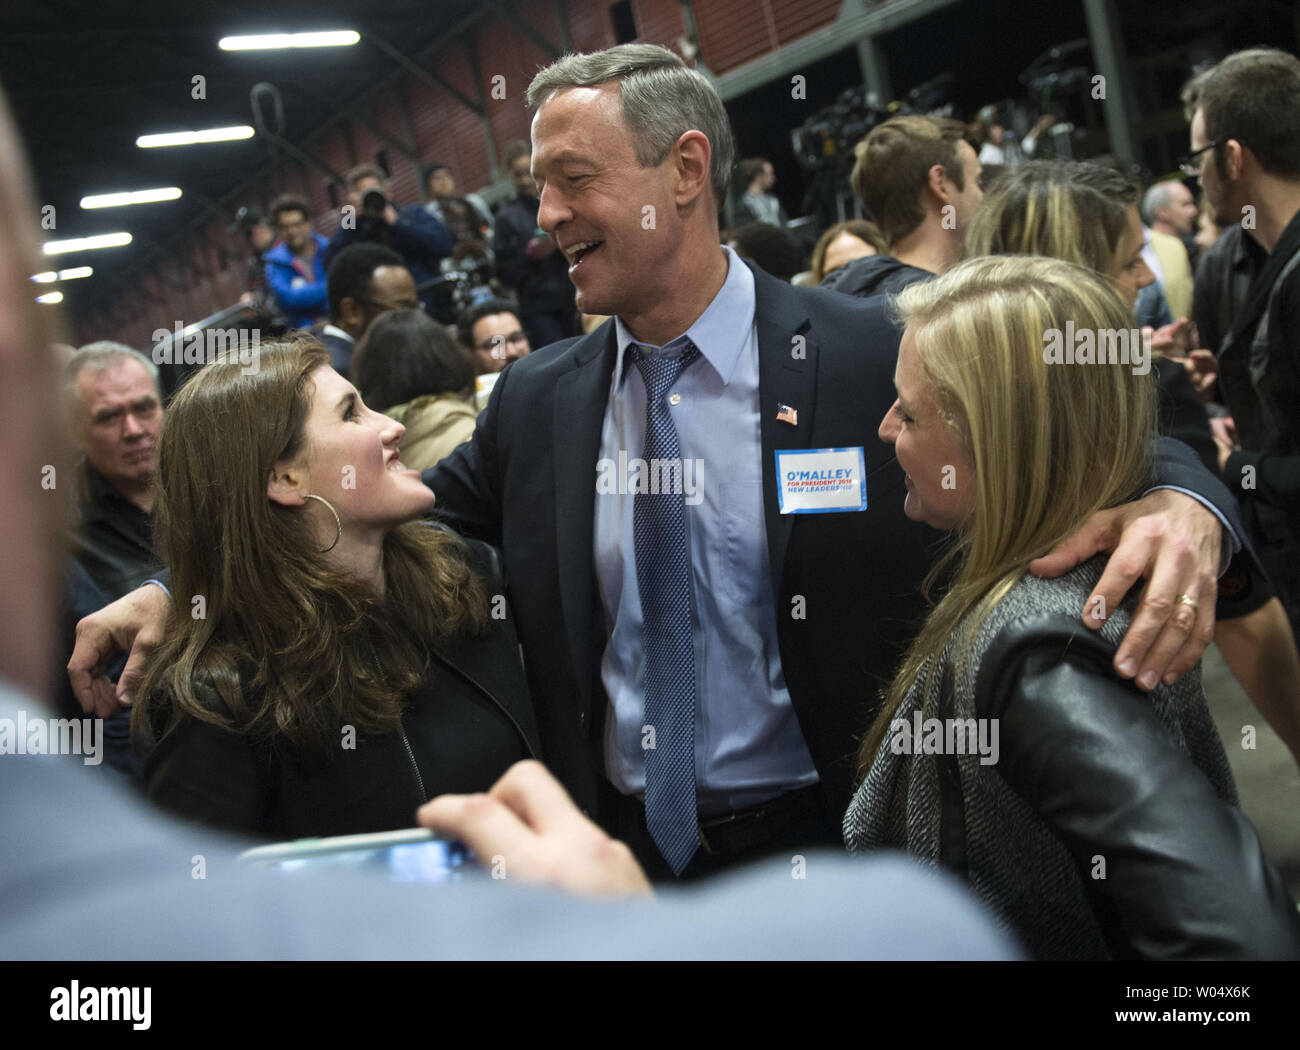 Democratic presidential candidate Martin O'Malley greets people at the James Clyburn Fish Fry in Charleston, South Carolina on January 17, 2106. Photo by Kevin Dietsch/UPI Stock Photo